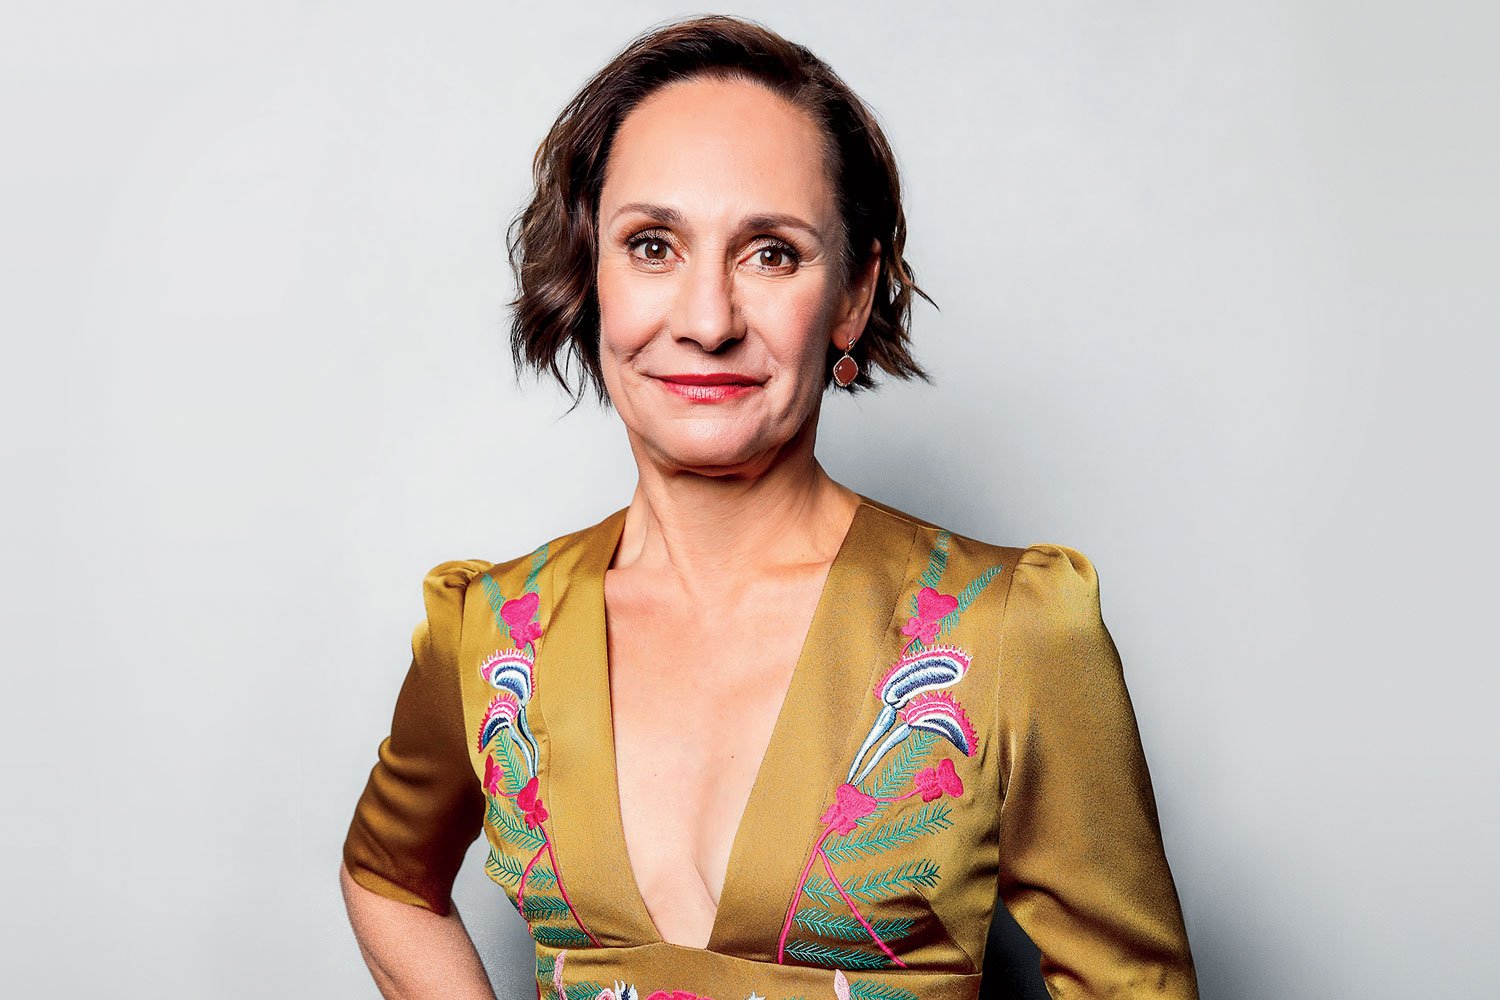 The Conners Cast - Laurie Metcalf as Jackie Harris